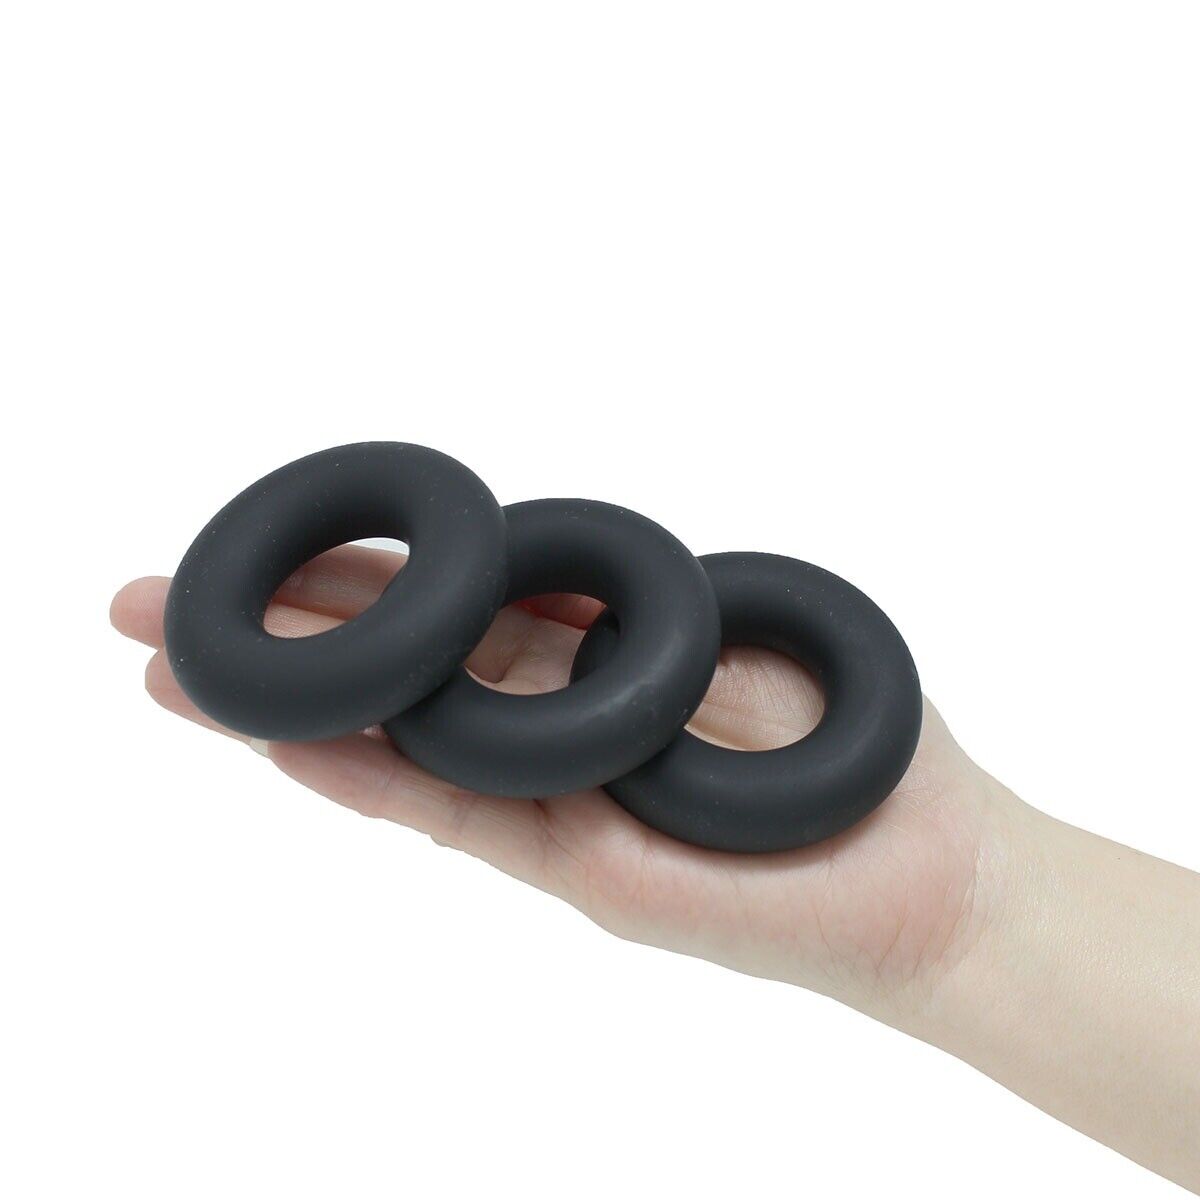 3 Stretchy Silicone Male Penis Enhancer Prolong Delay Sex Cock Ring for Men